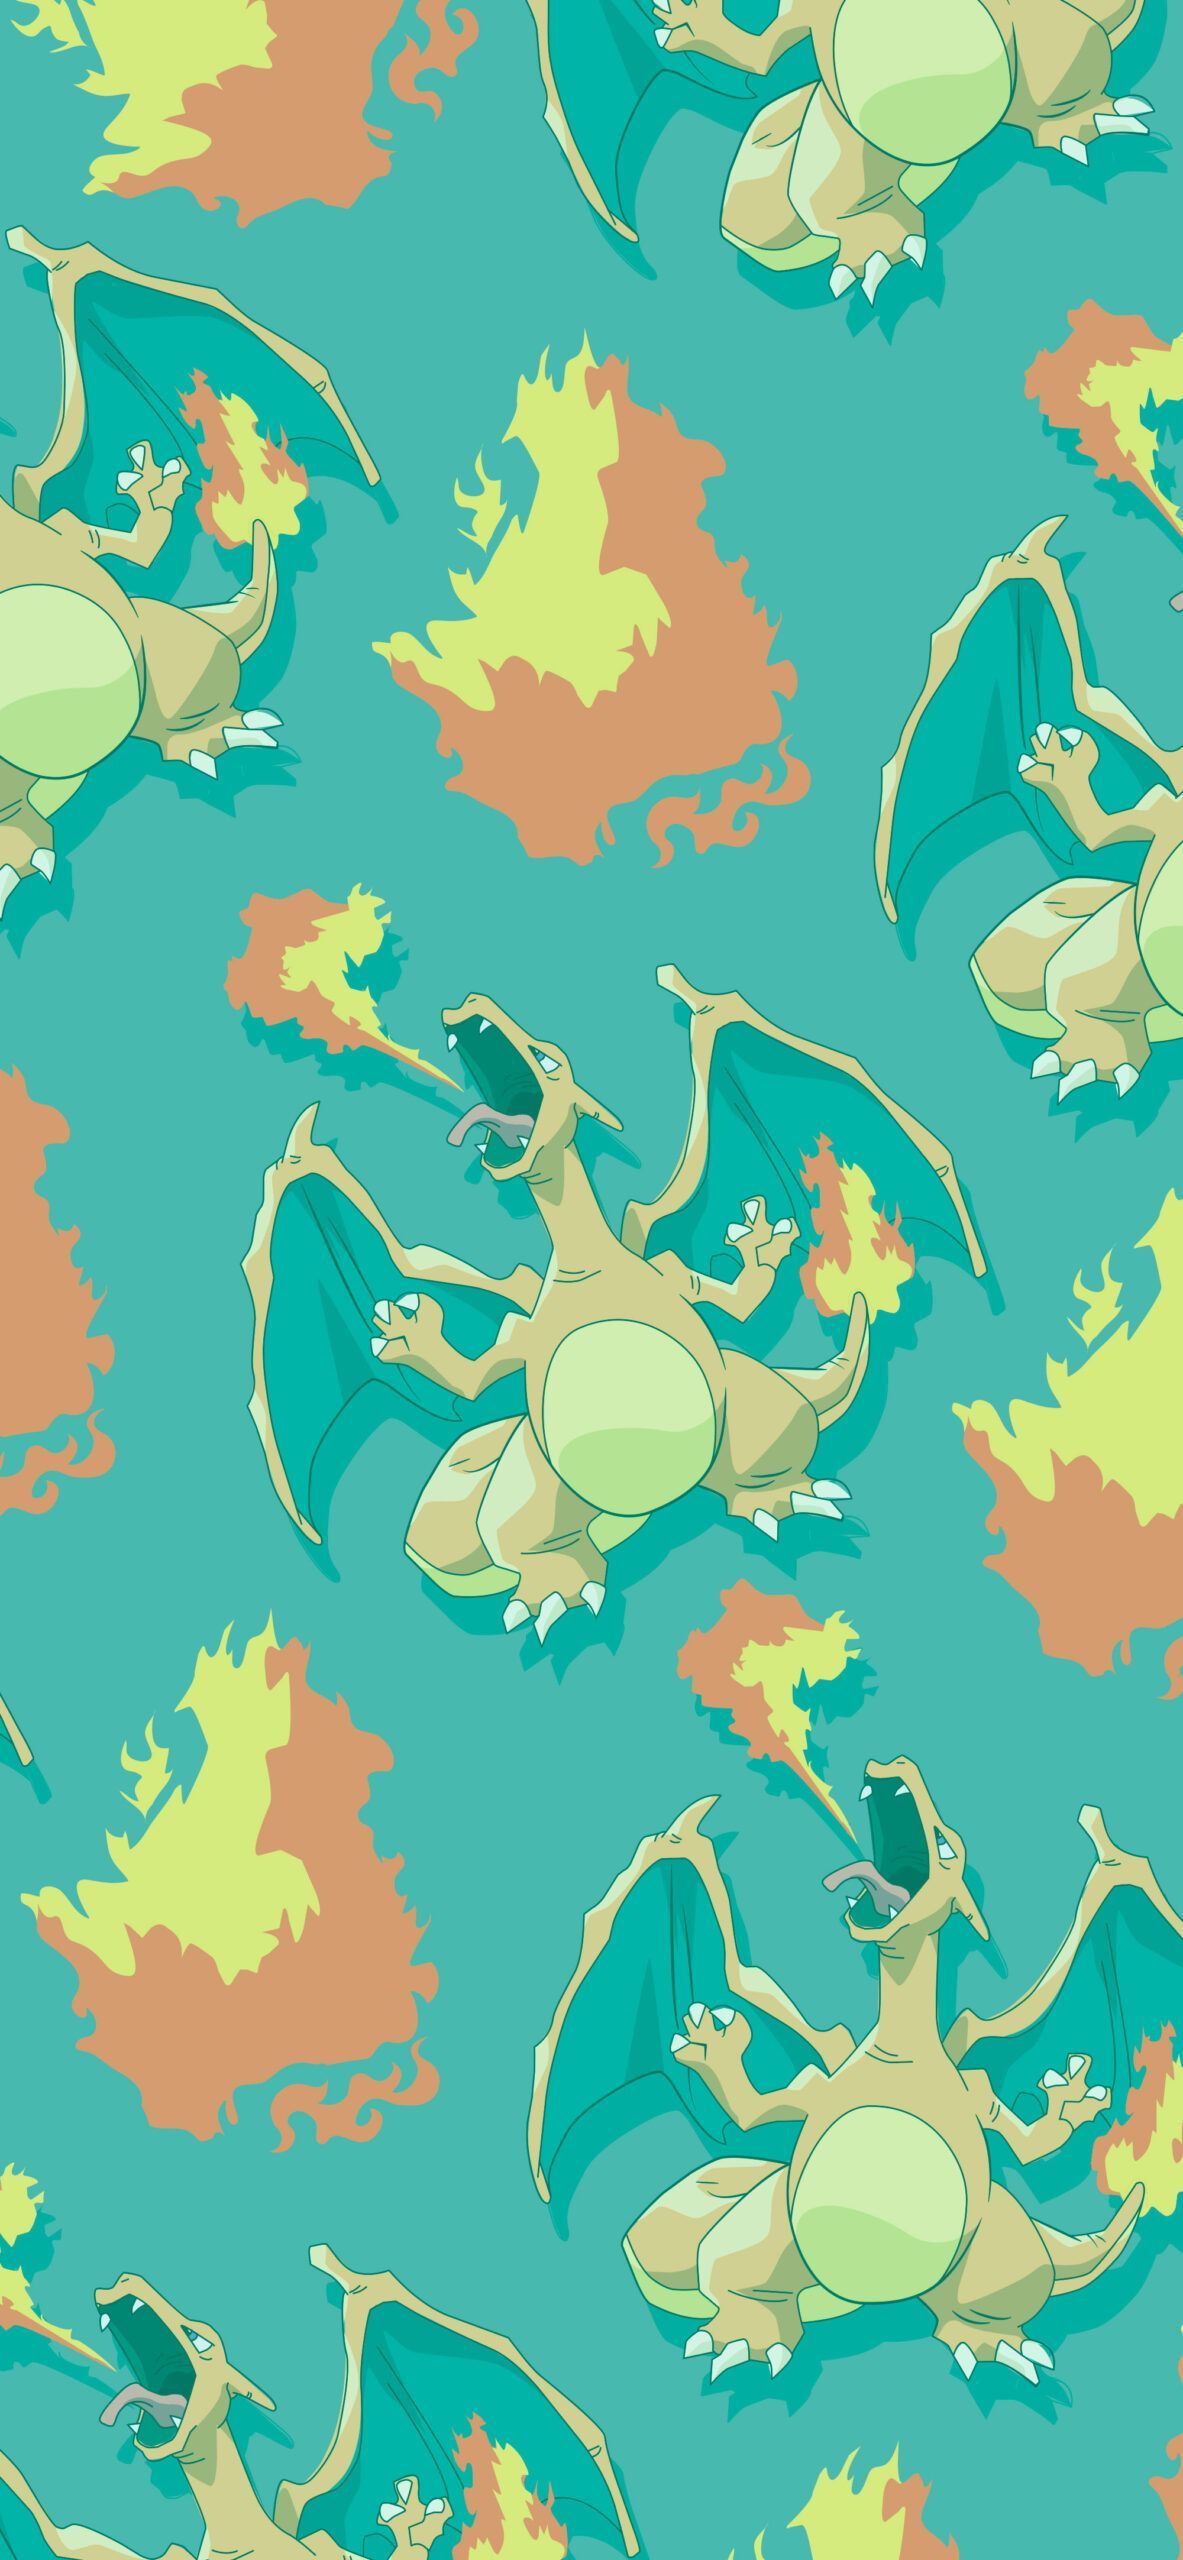 Pokemon Wallpaper HD for iPhone with Charizard